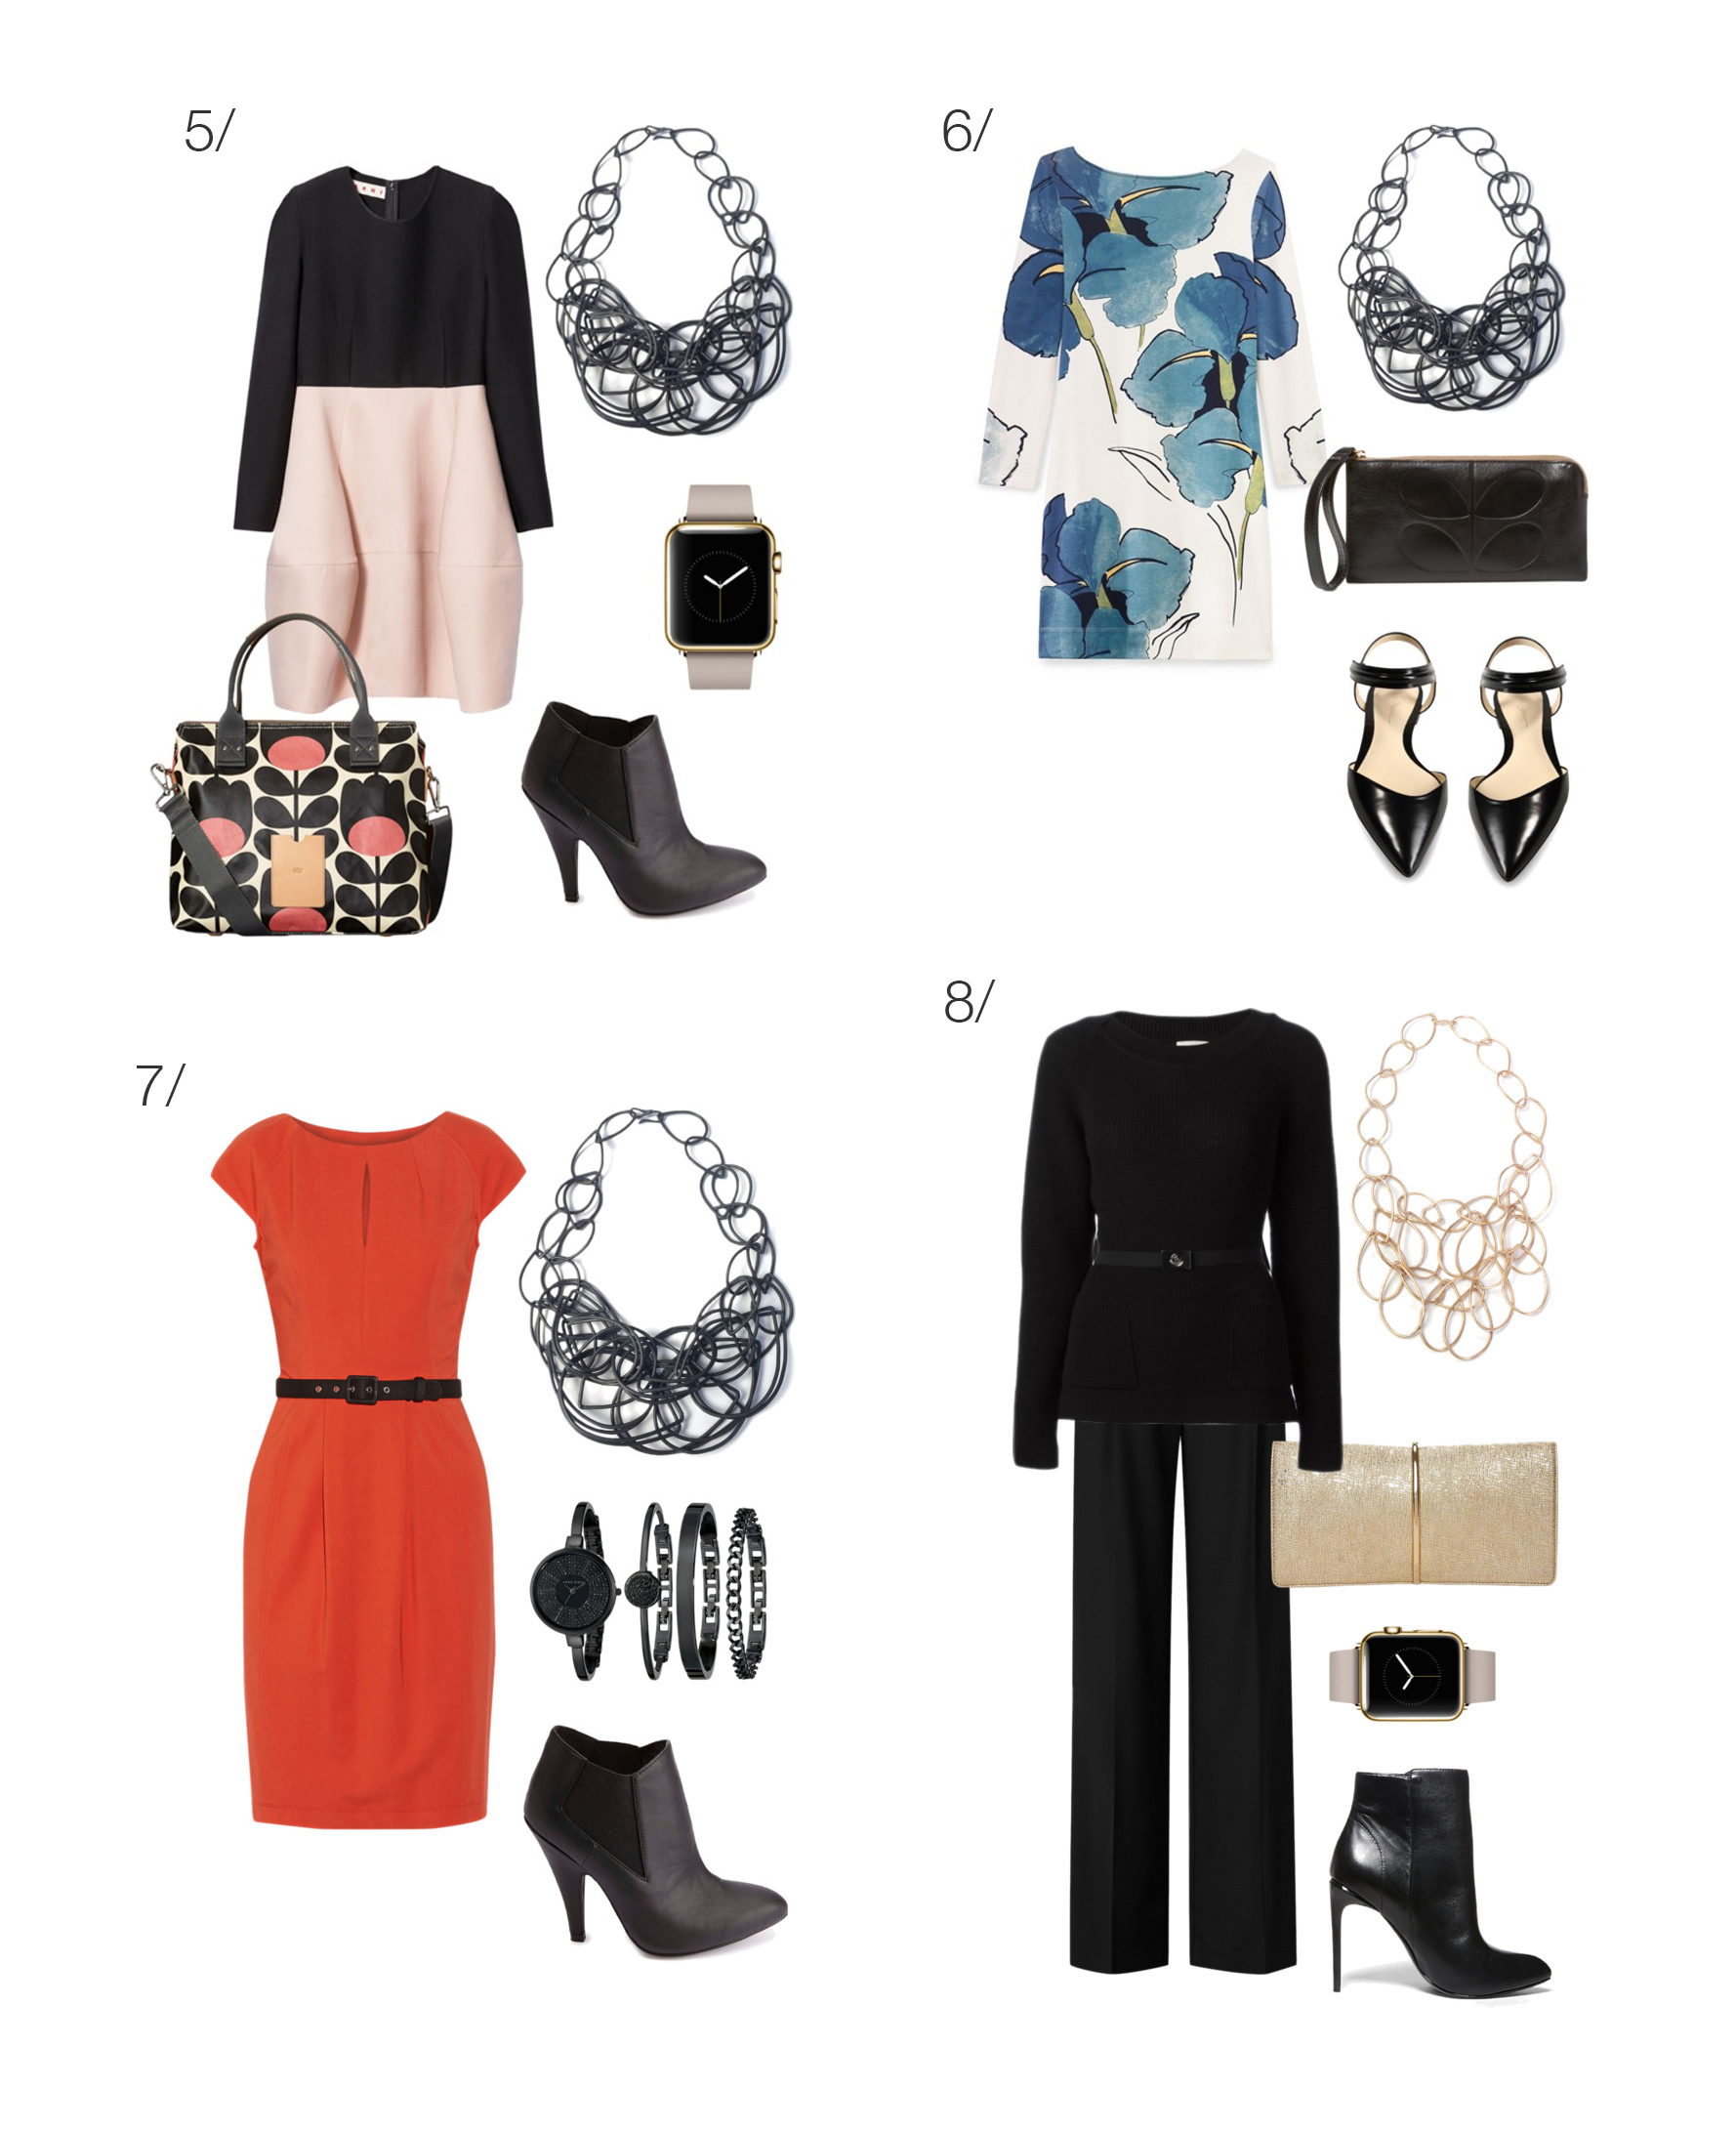 8 ways to wear a statement necklace to work // click for outfit details